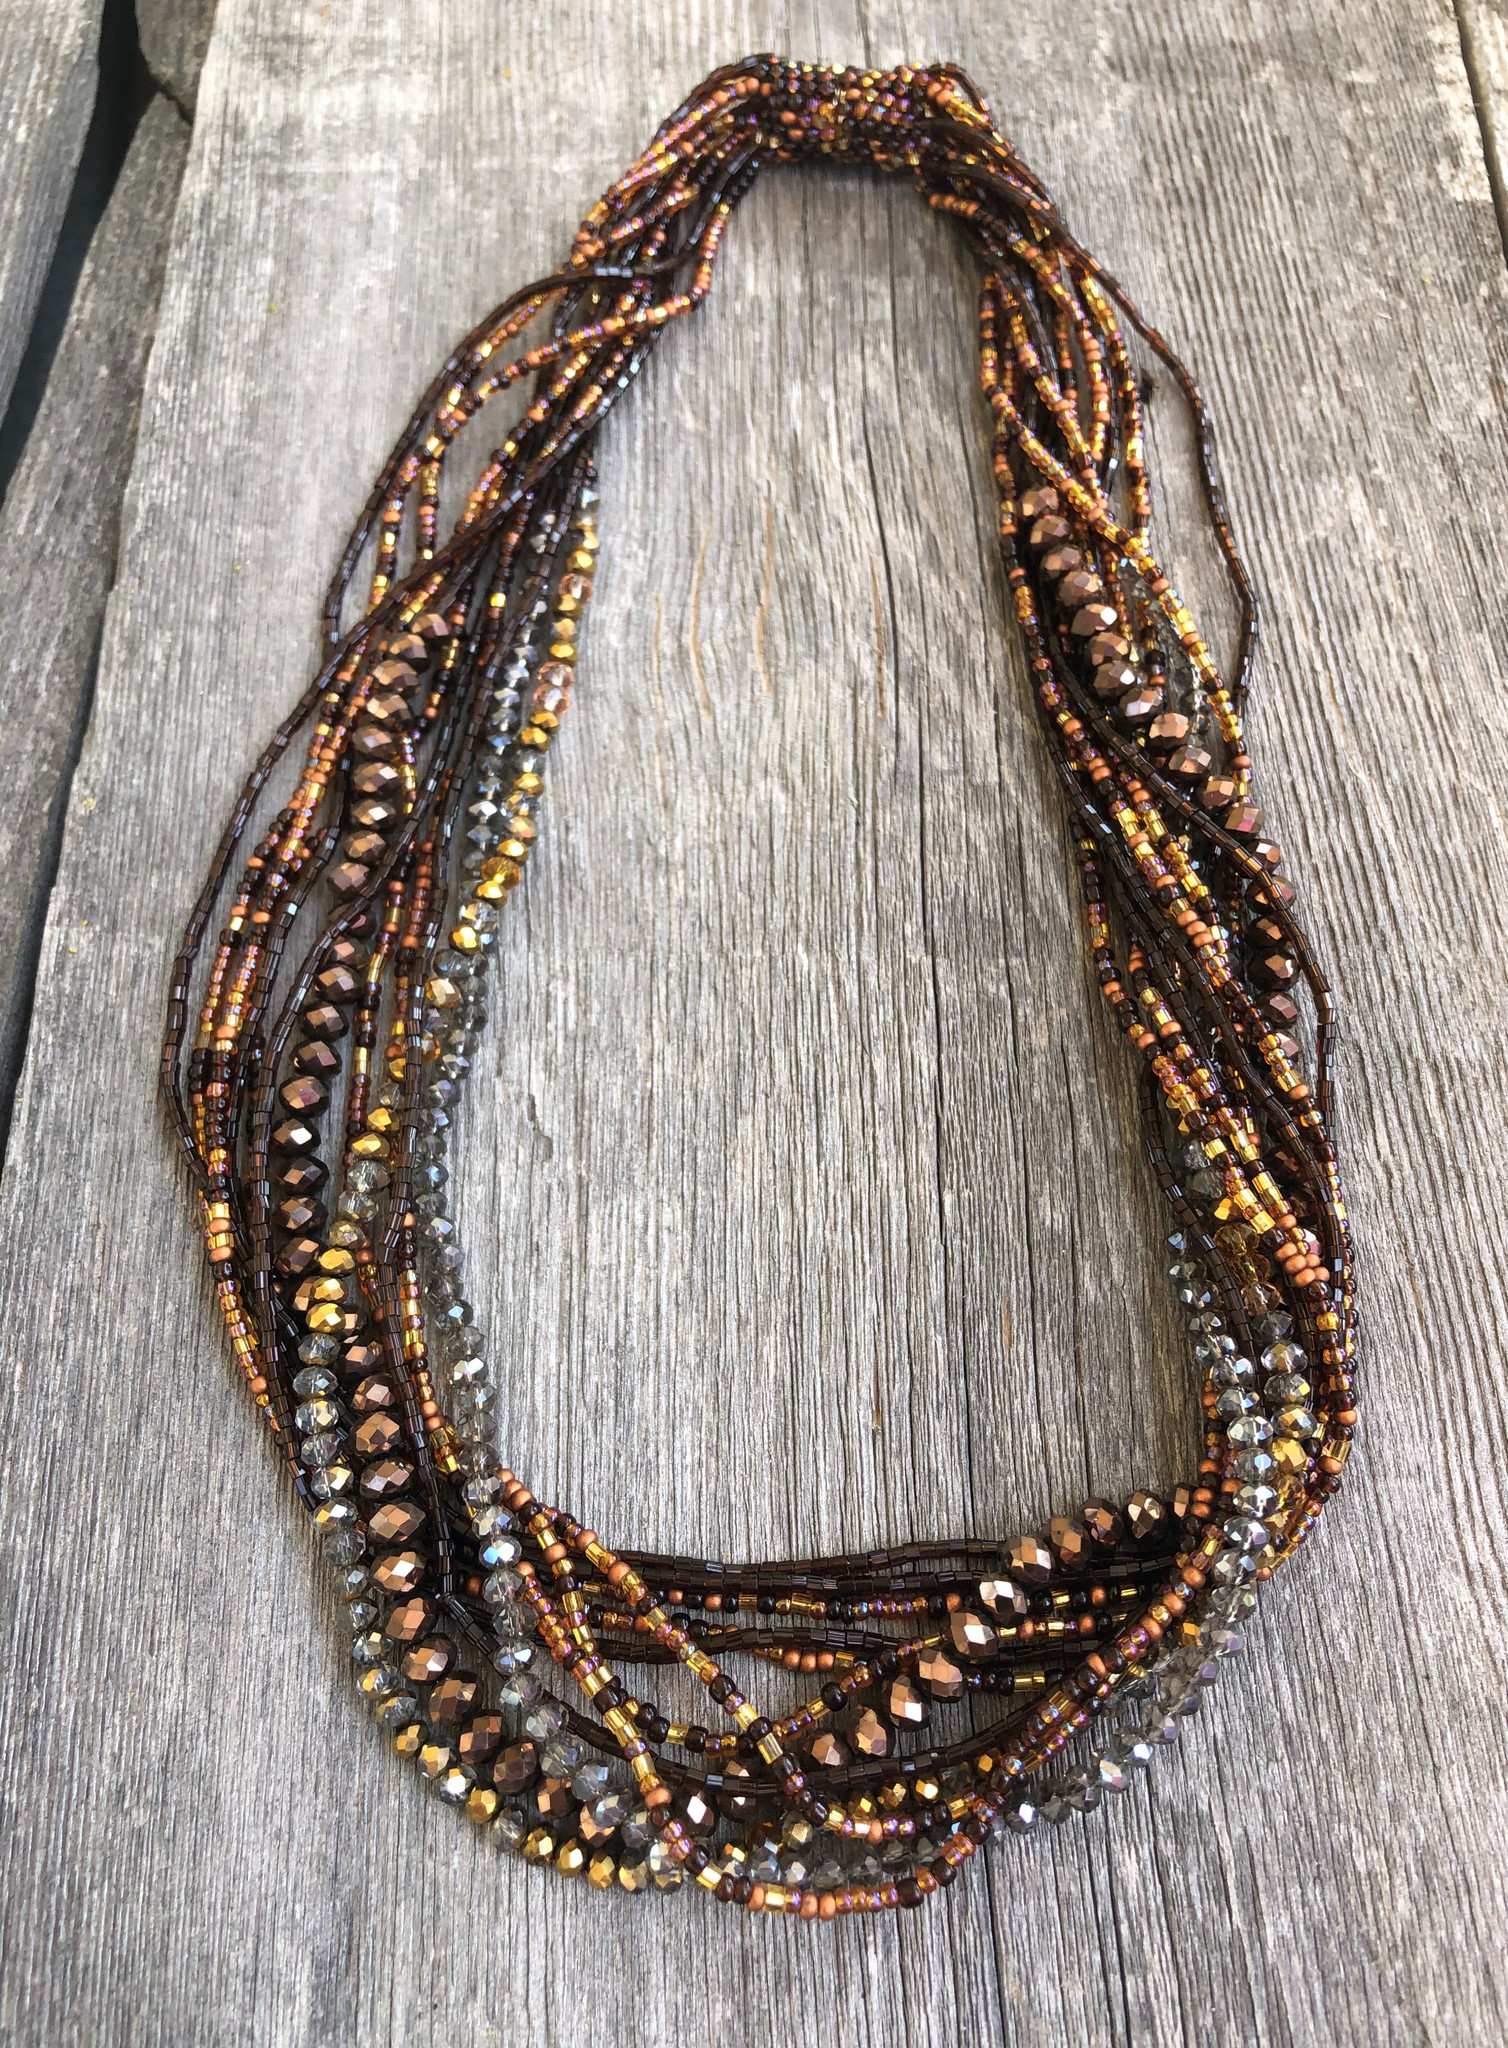 Colorful Beaded Necklace, Women's Jewelry